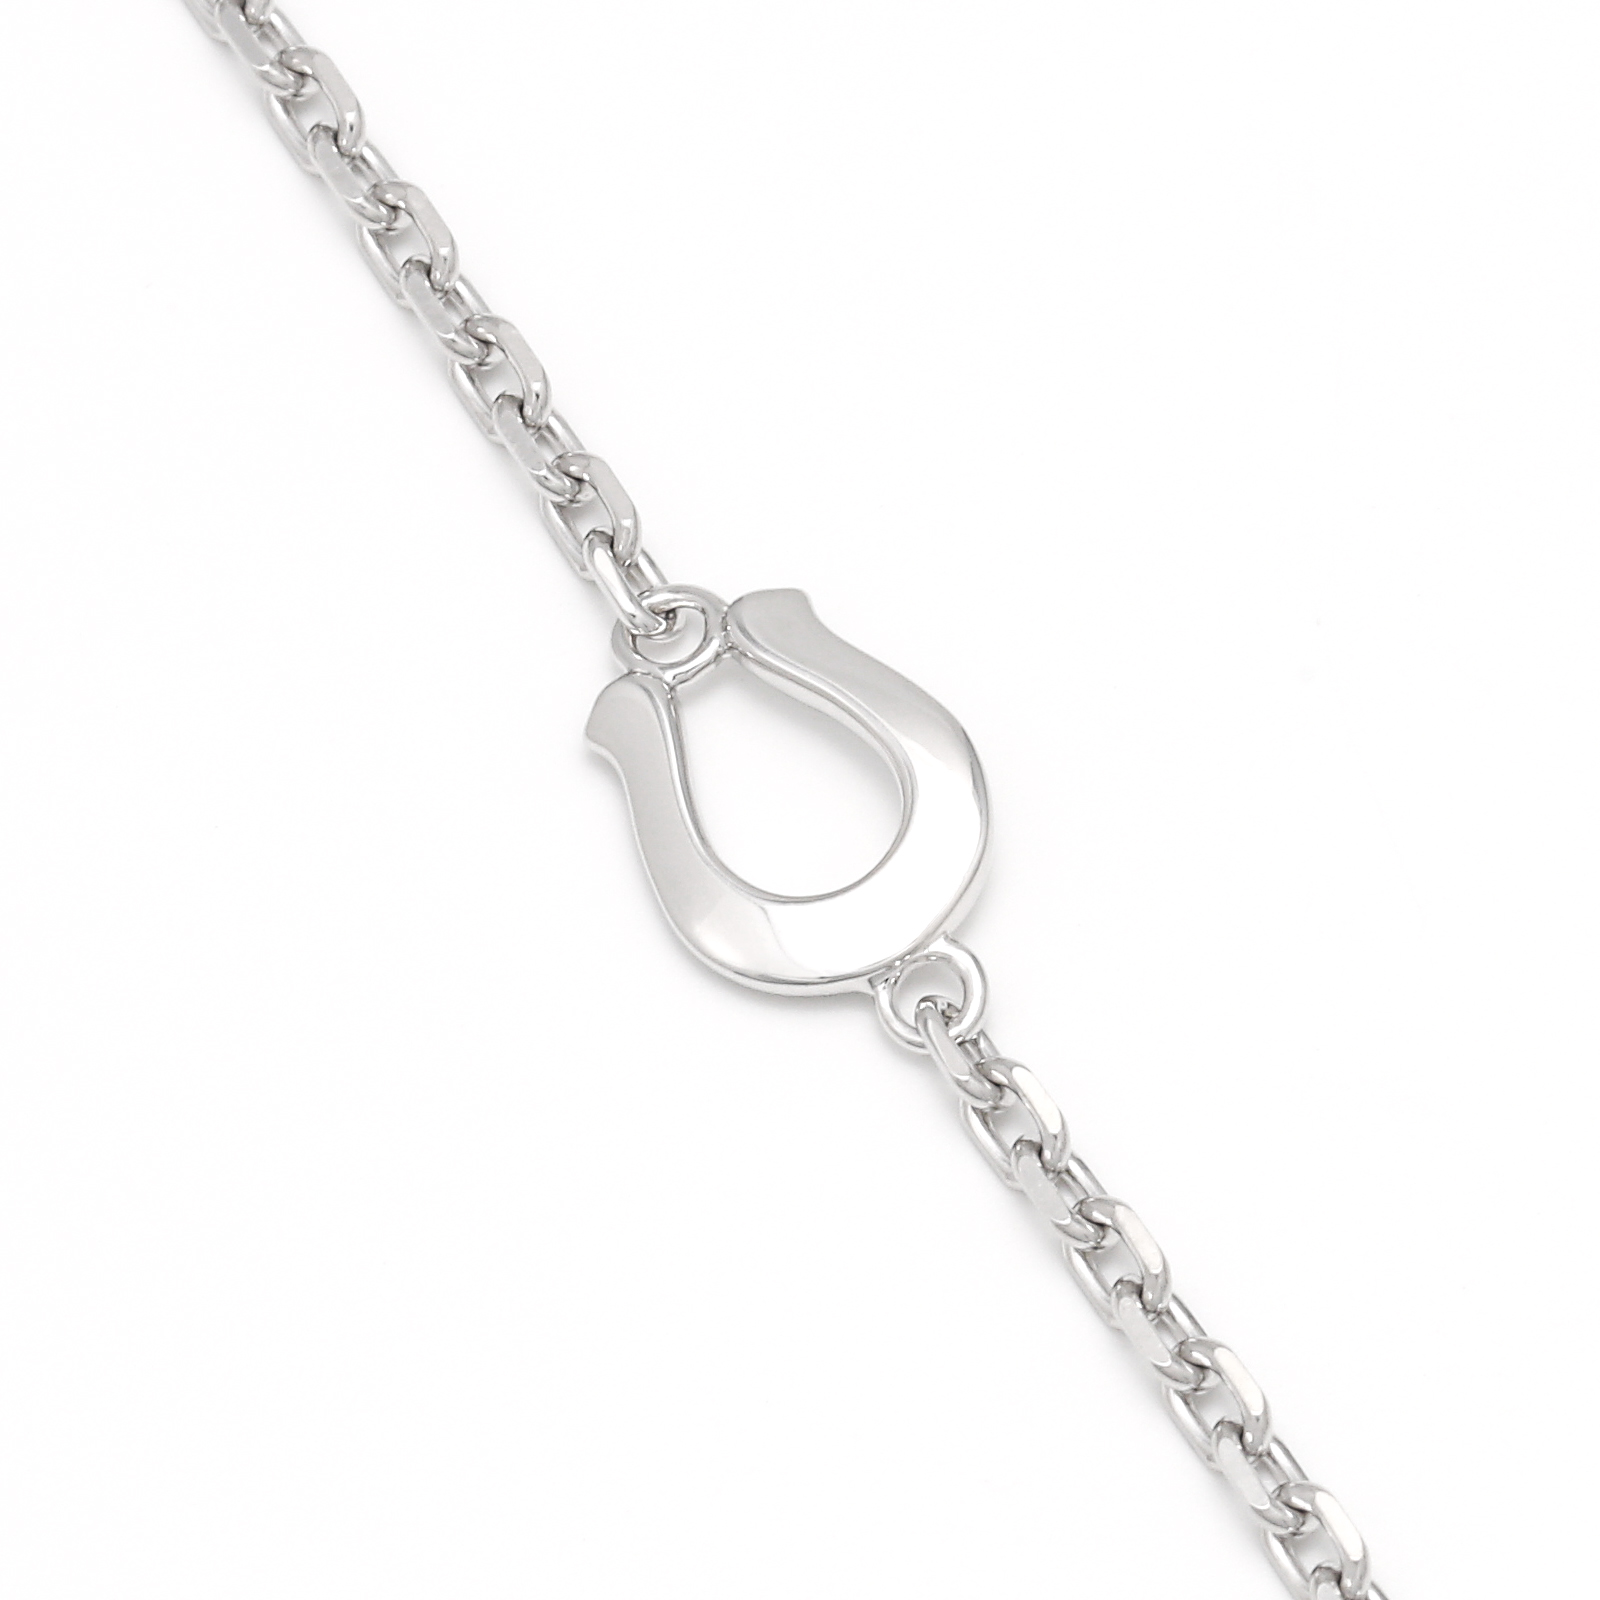 SYMPATHY OF SOUL（シンパシーオブソウル） Horseshoe Amulet Chain Anklet - Silver